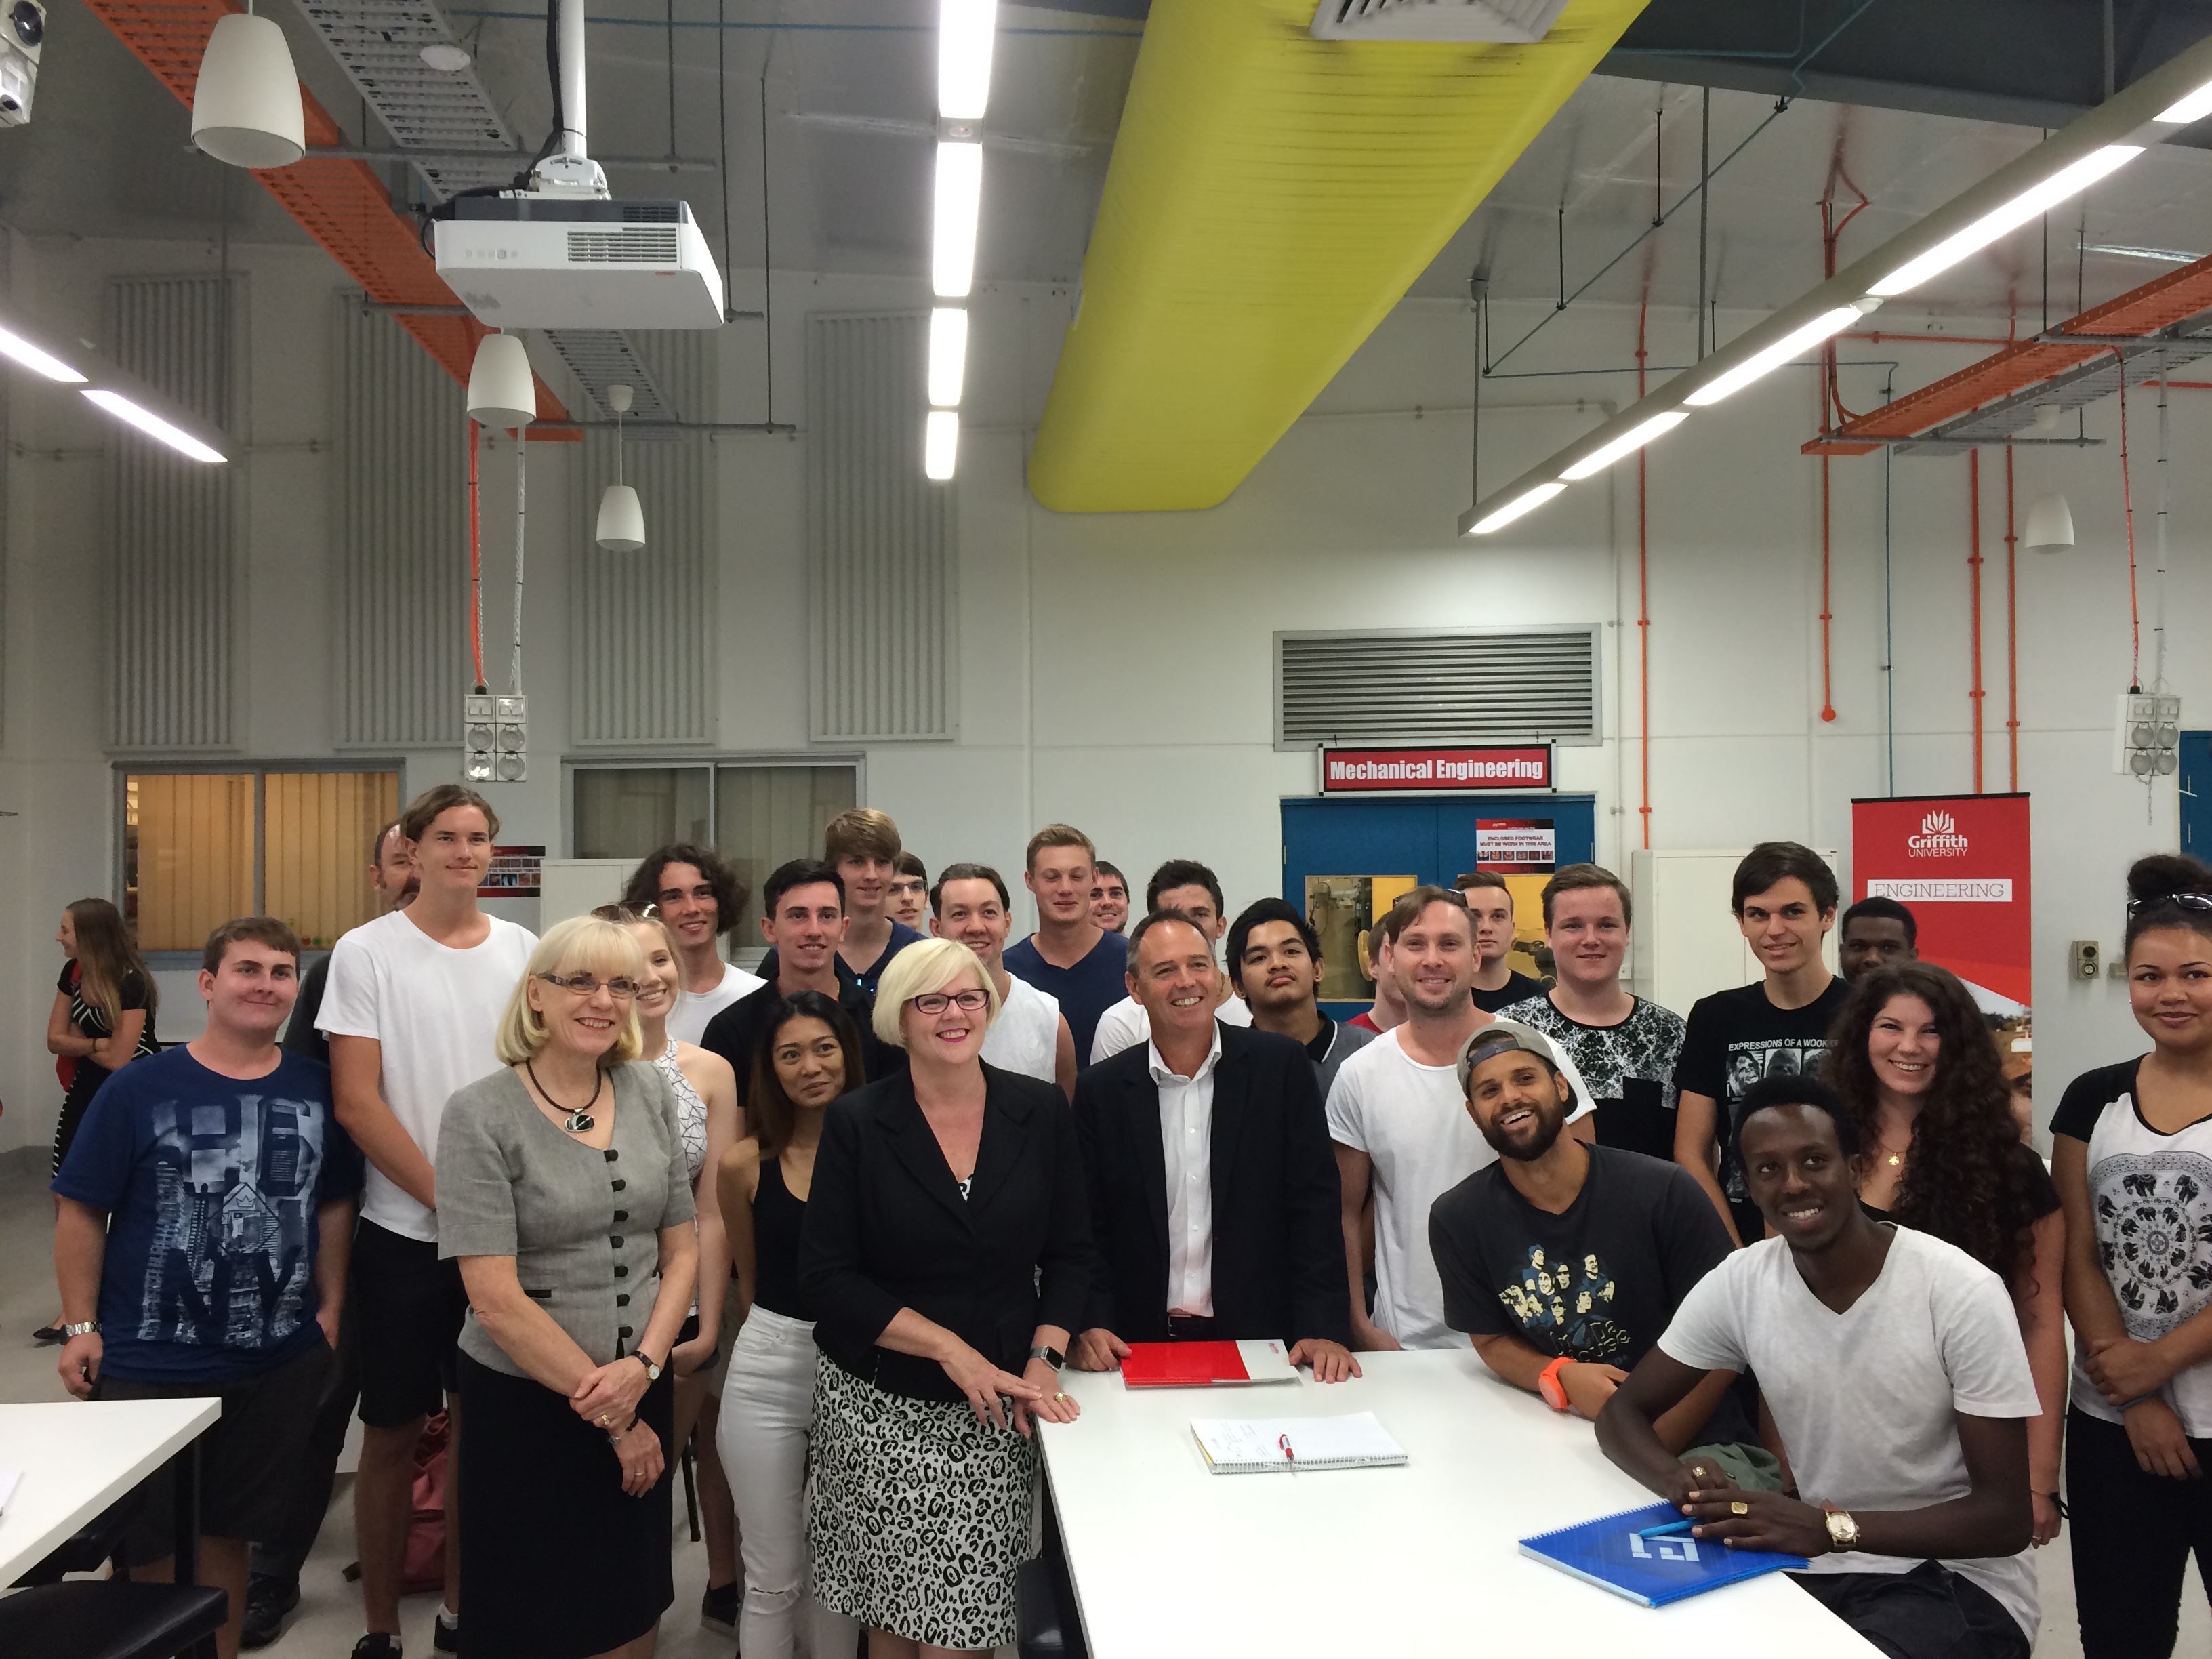 Hon Karen Andrews MP, Assistant Minister for Science visits first year engineering students at Gold Coast campus, Griffith University.